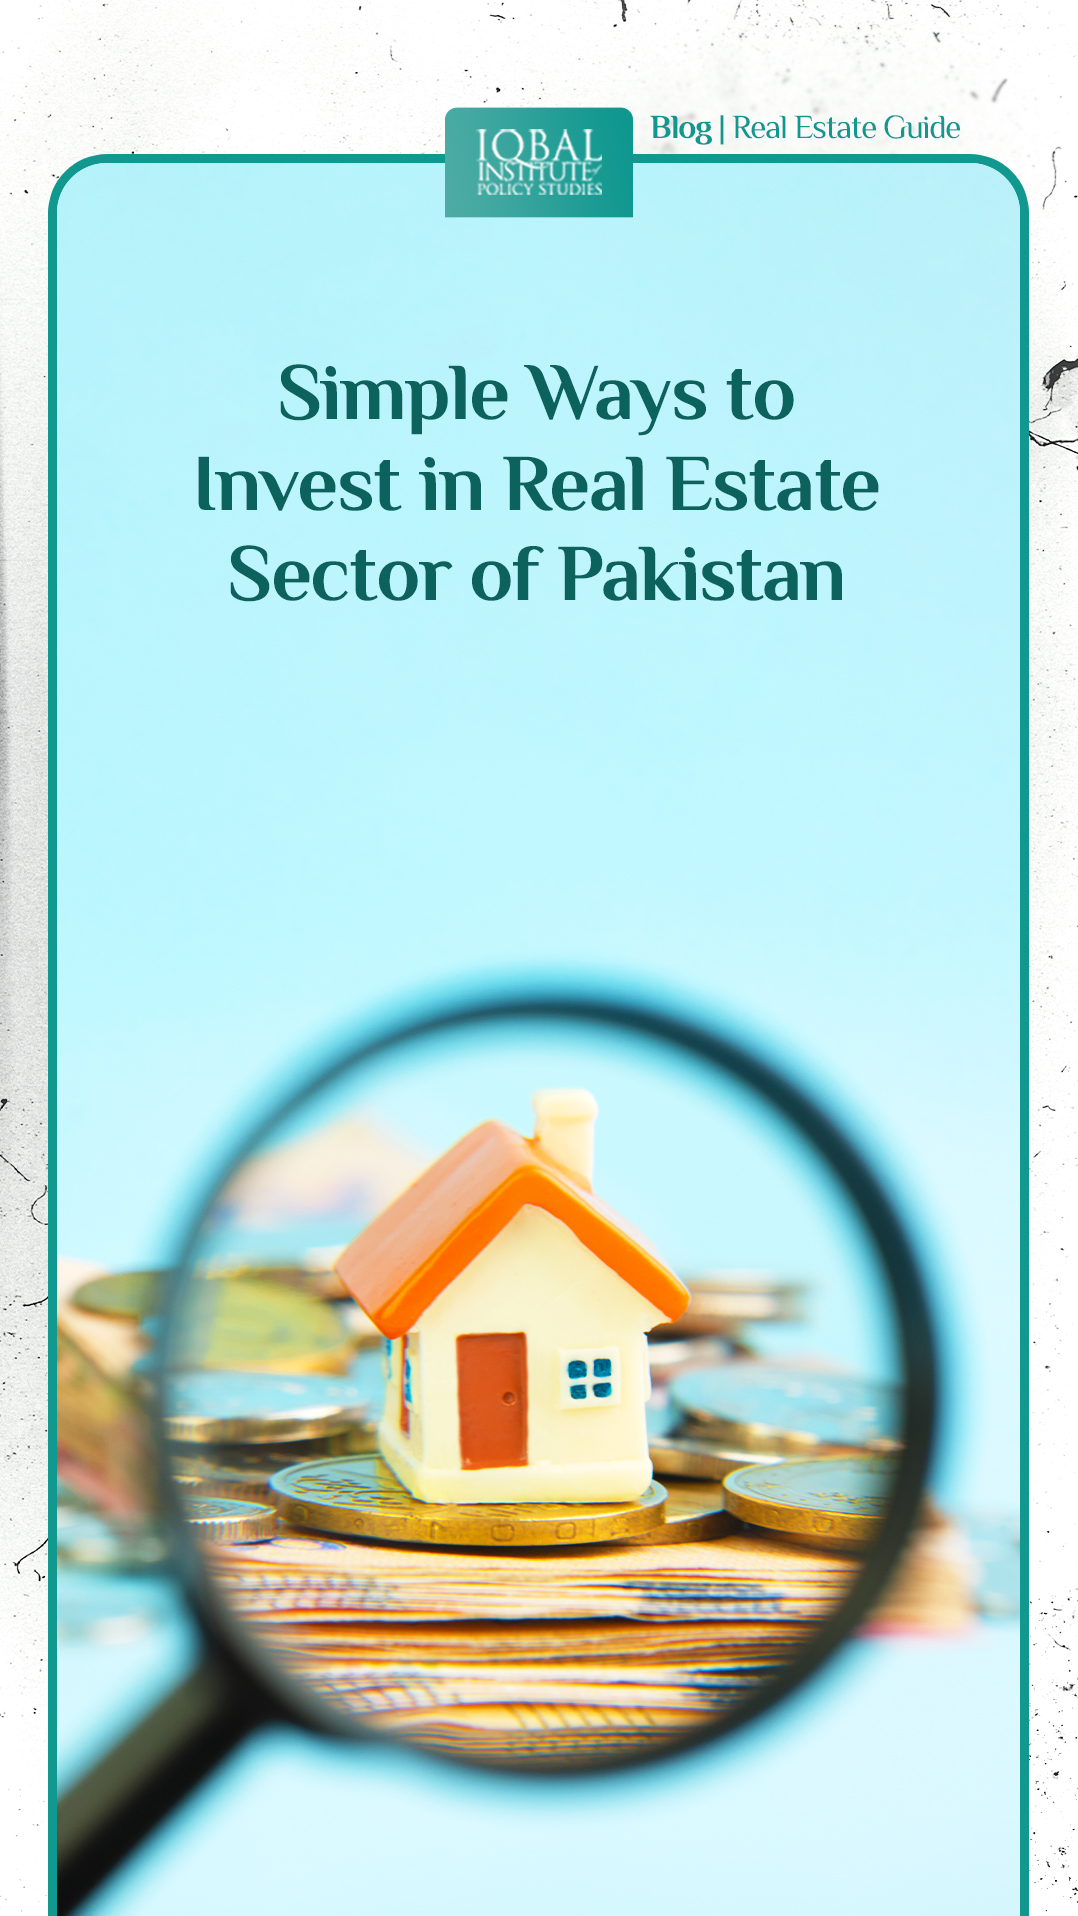 Simple ways to invest in real estate sector of Pakistan